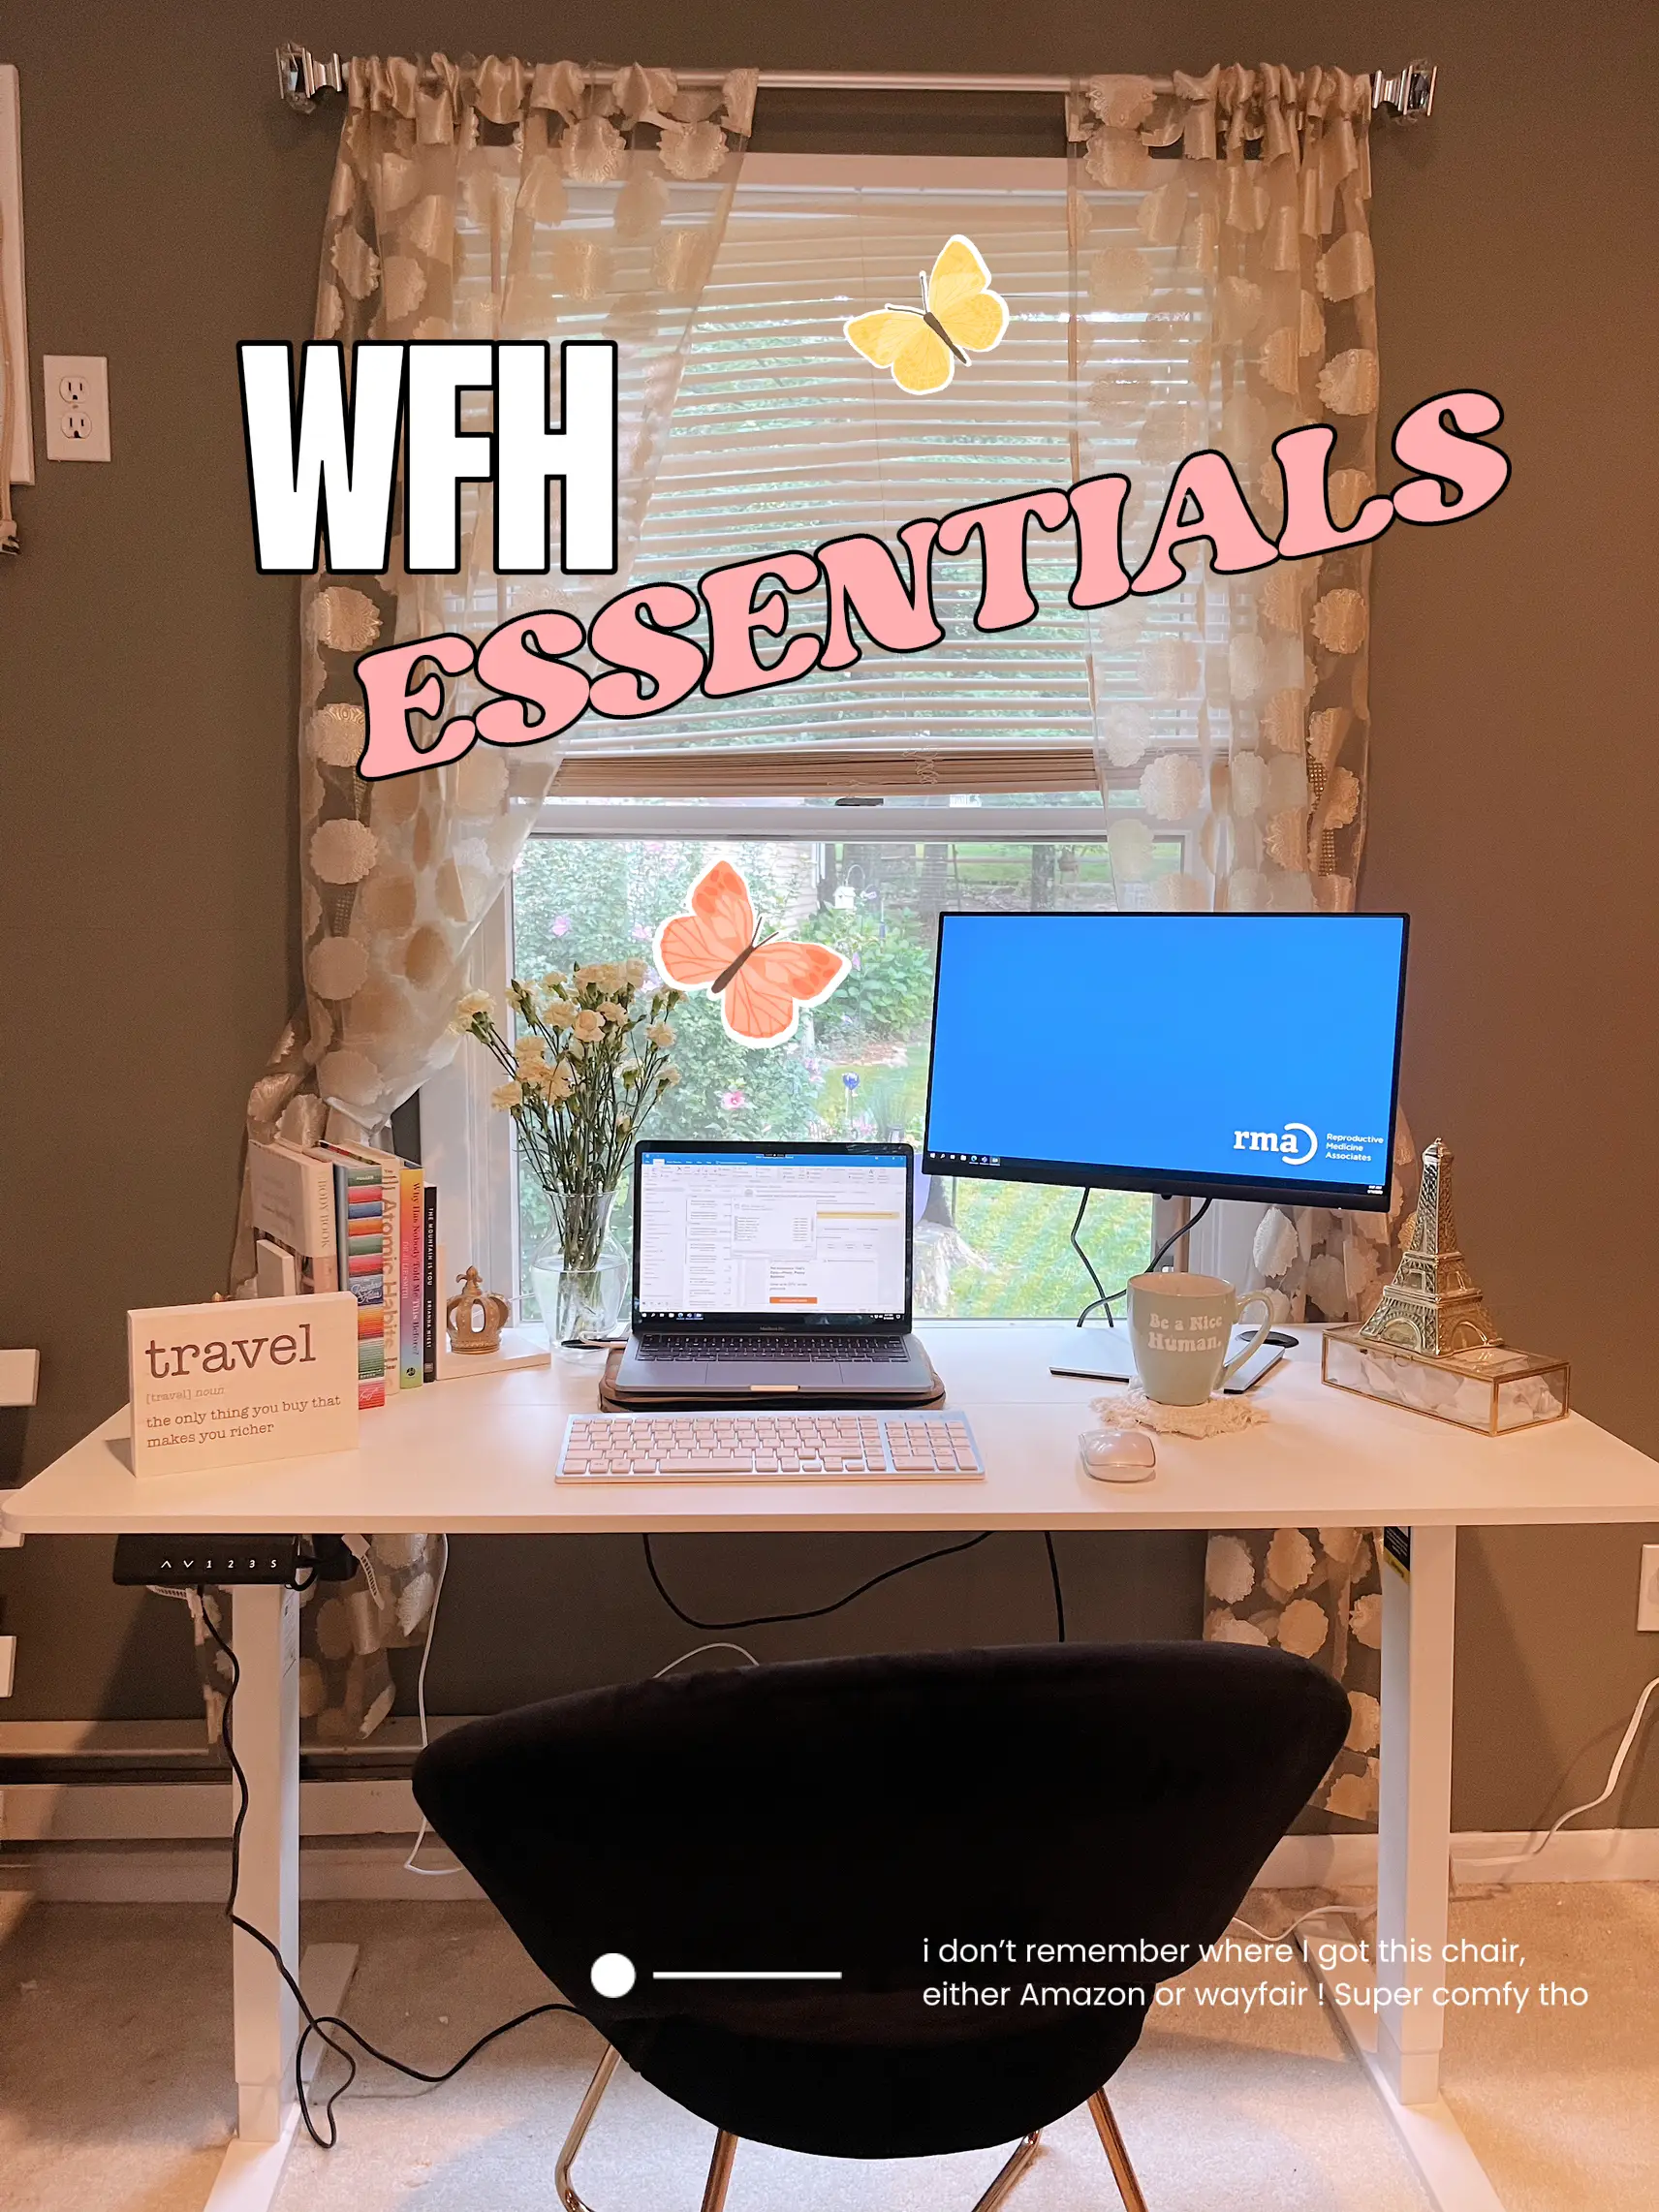 WFH ESSENTIALS, Gallery posted by Courtney Daley